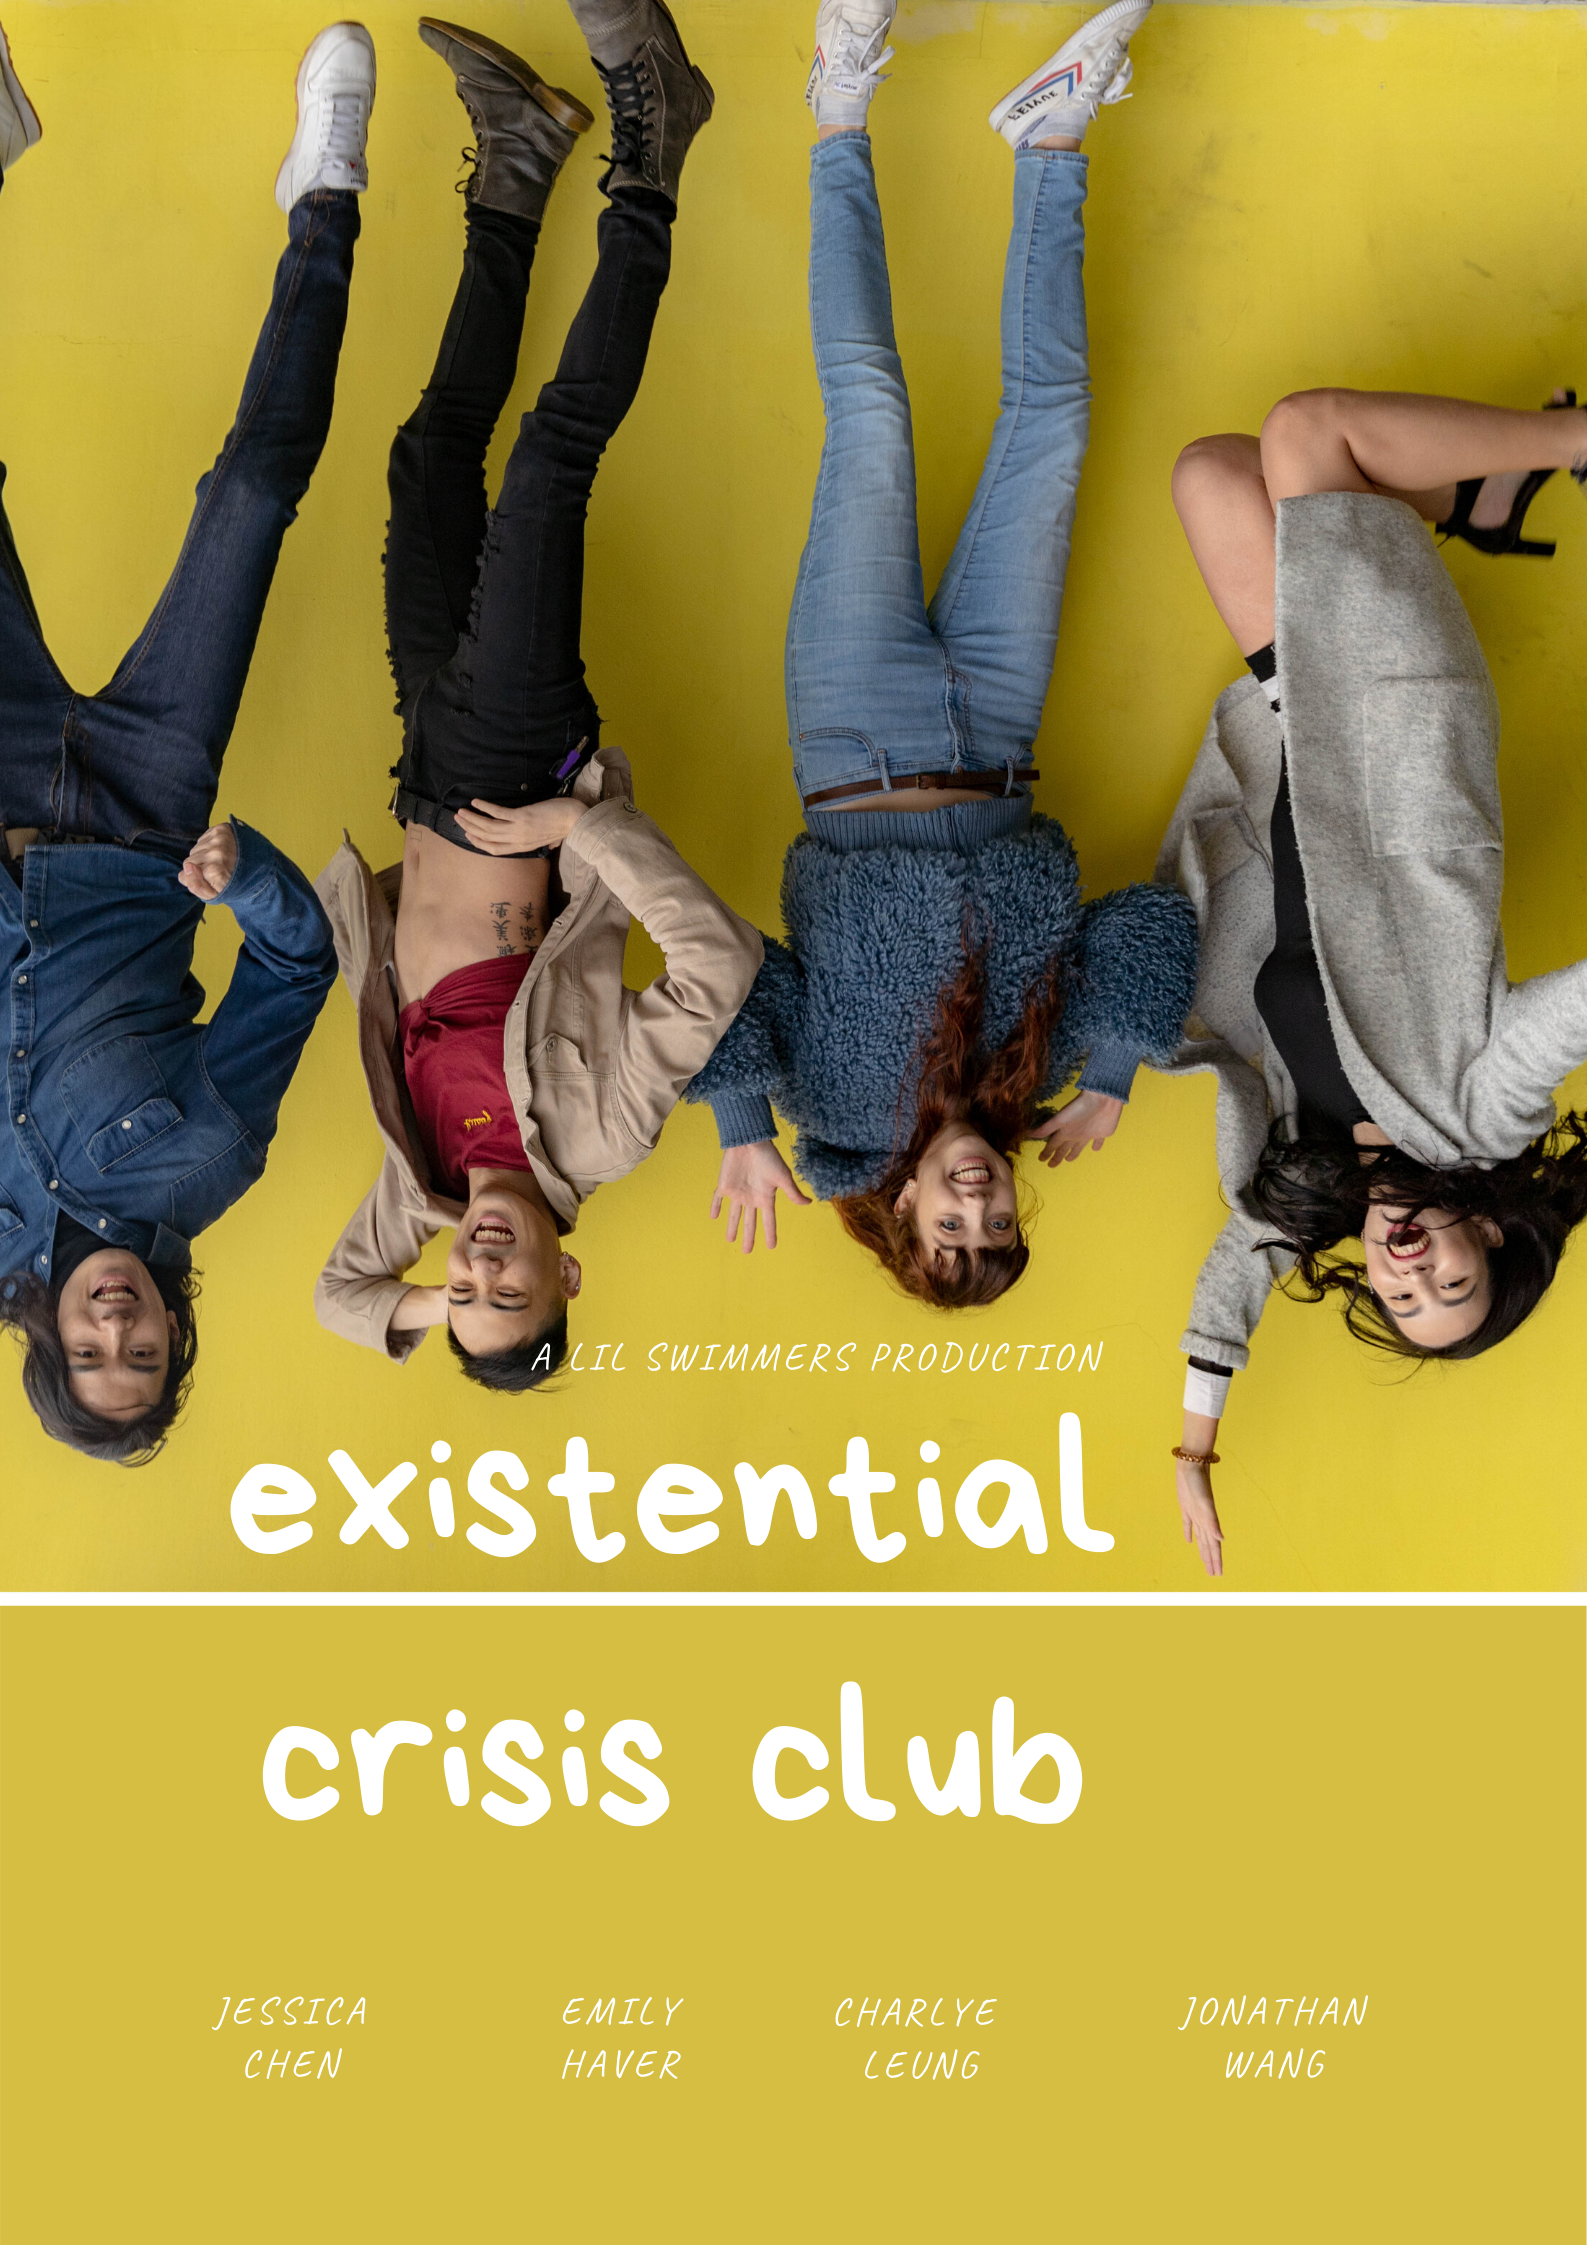 Existential Crisis Club (Post-Production)